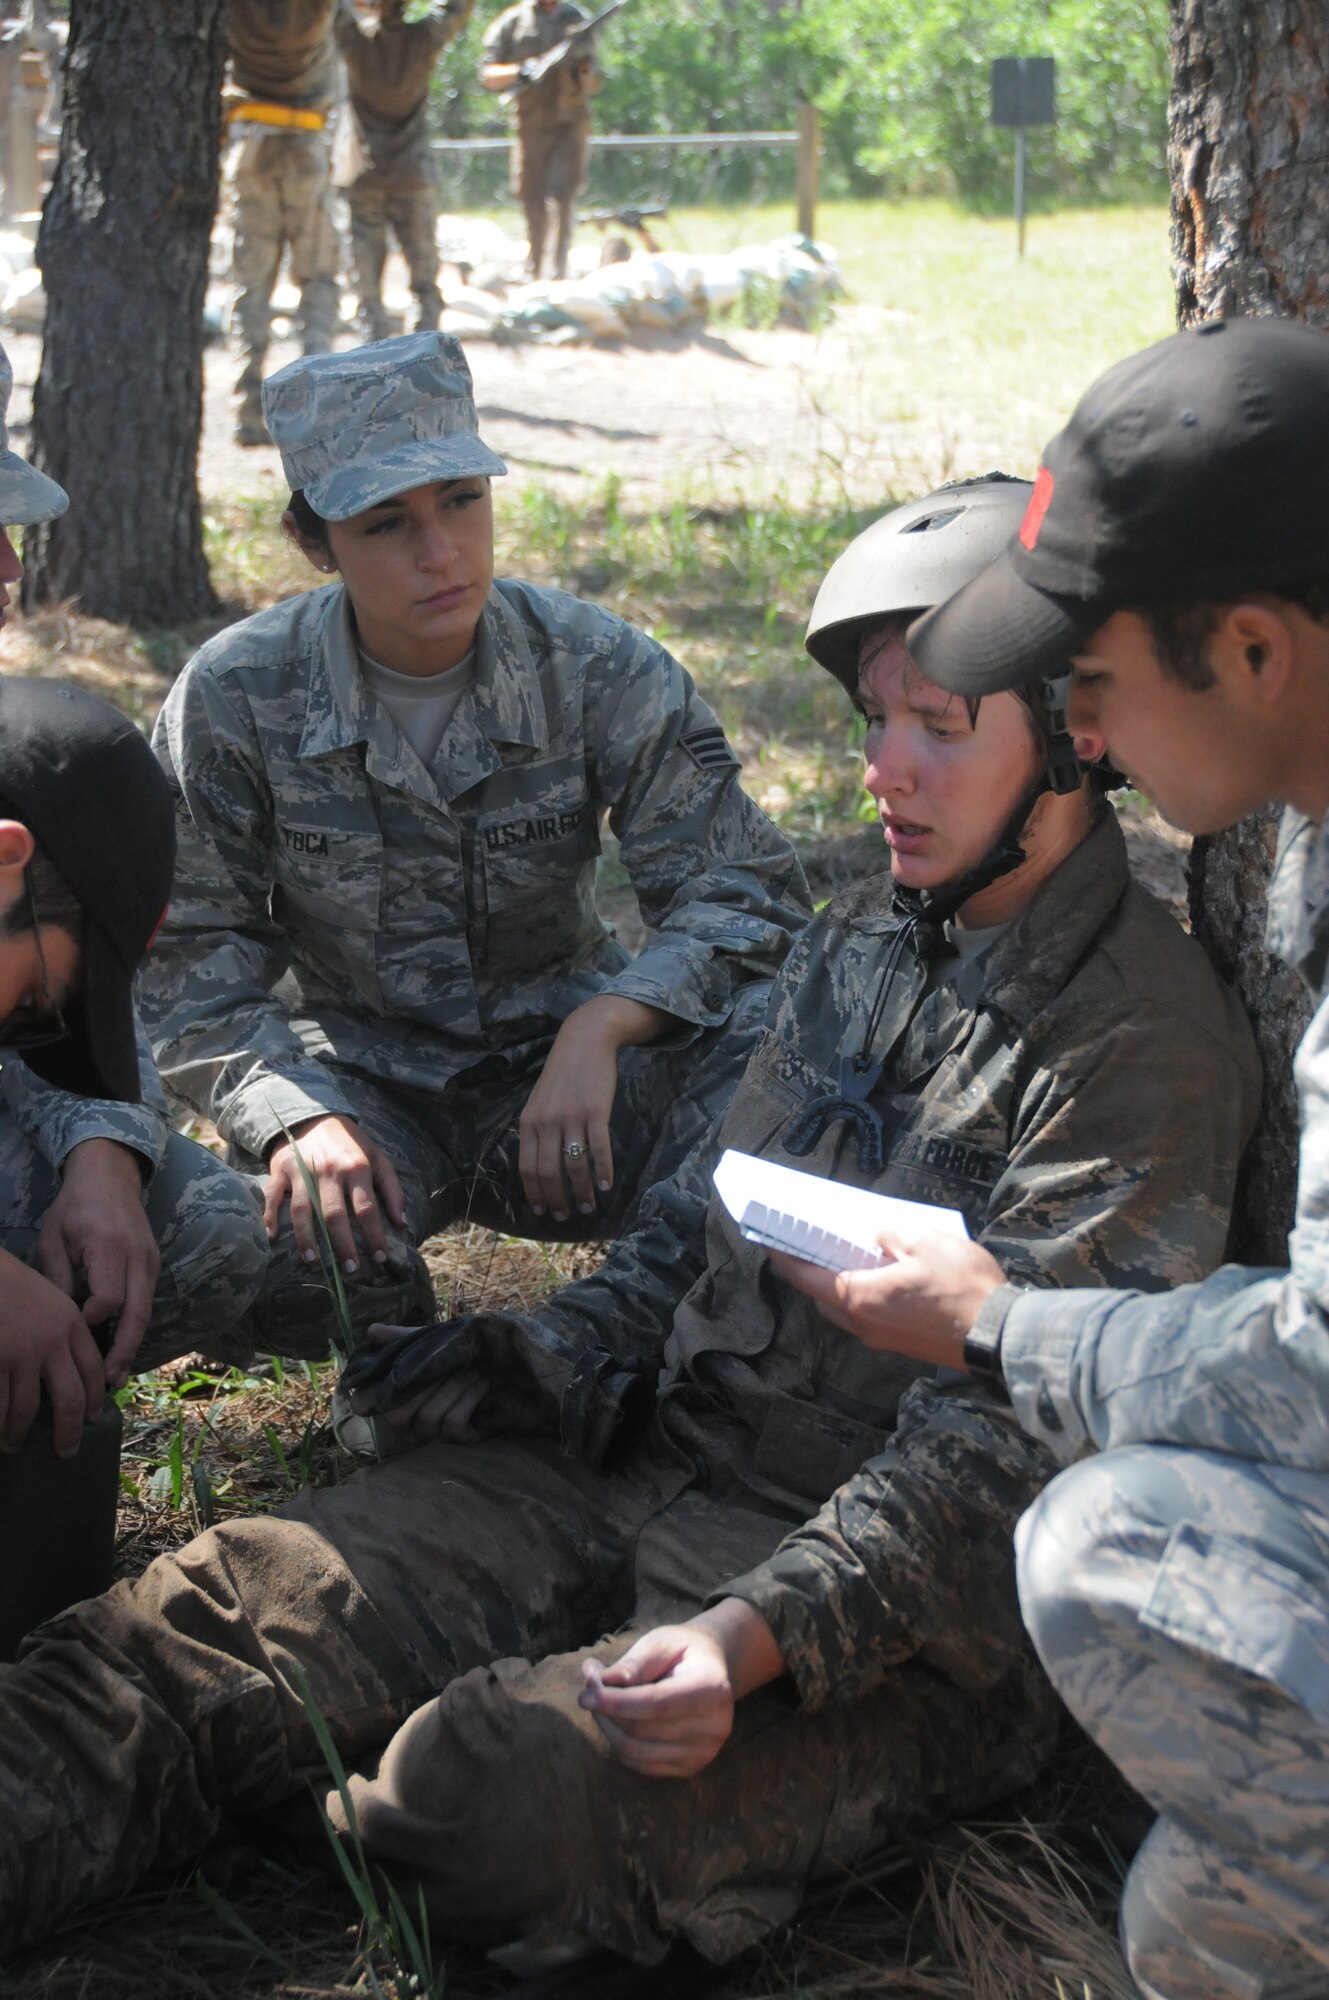 Senior Airman Alissa Toca (far left),a 445th Aeromedical Staging Squadron aerospace medical technician, provides technical supervision and support to U.S. Air Force Academy cadets during a field training event at the Air Force Academy, Colorado Springs, July 23, 2019.